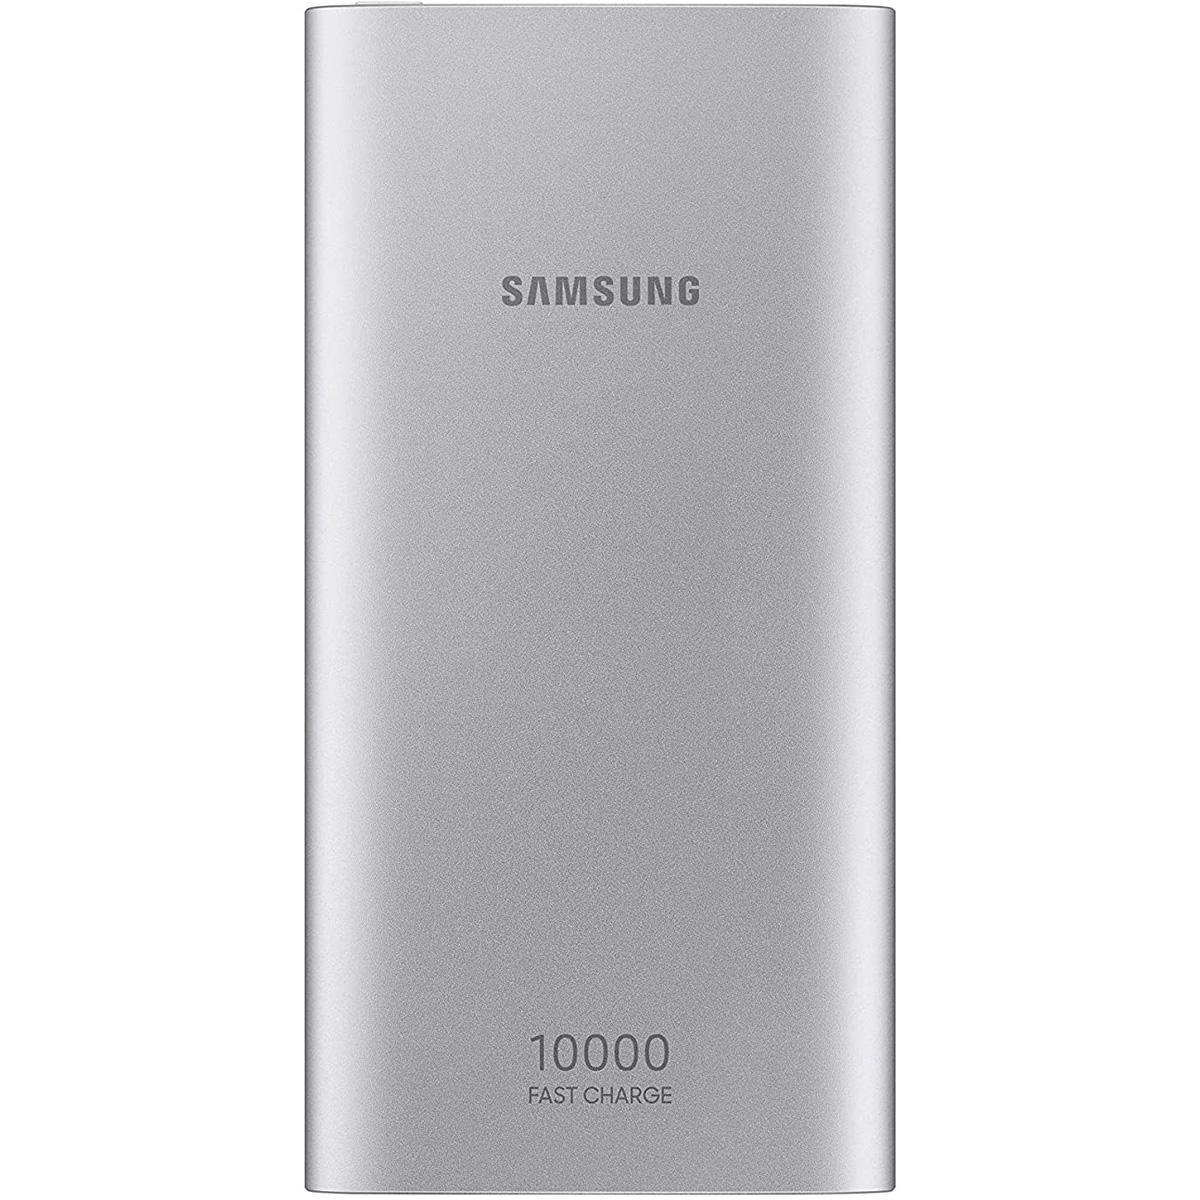 Samsung 10000mAh Portable Battery with microUSB Cable for $17